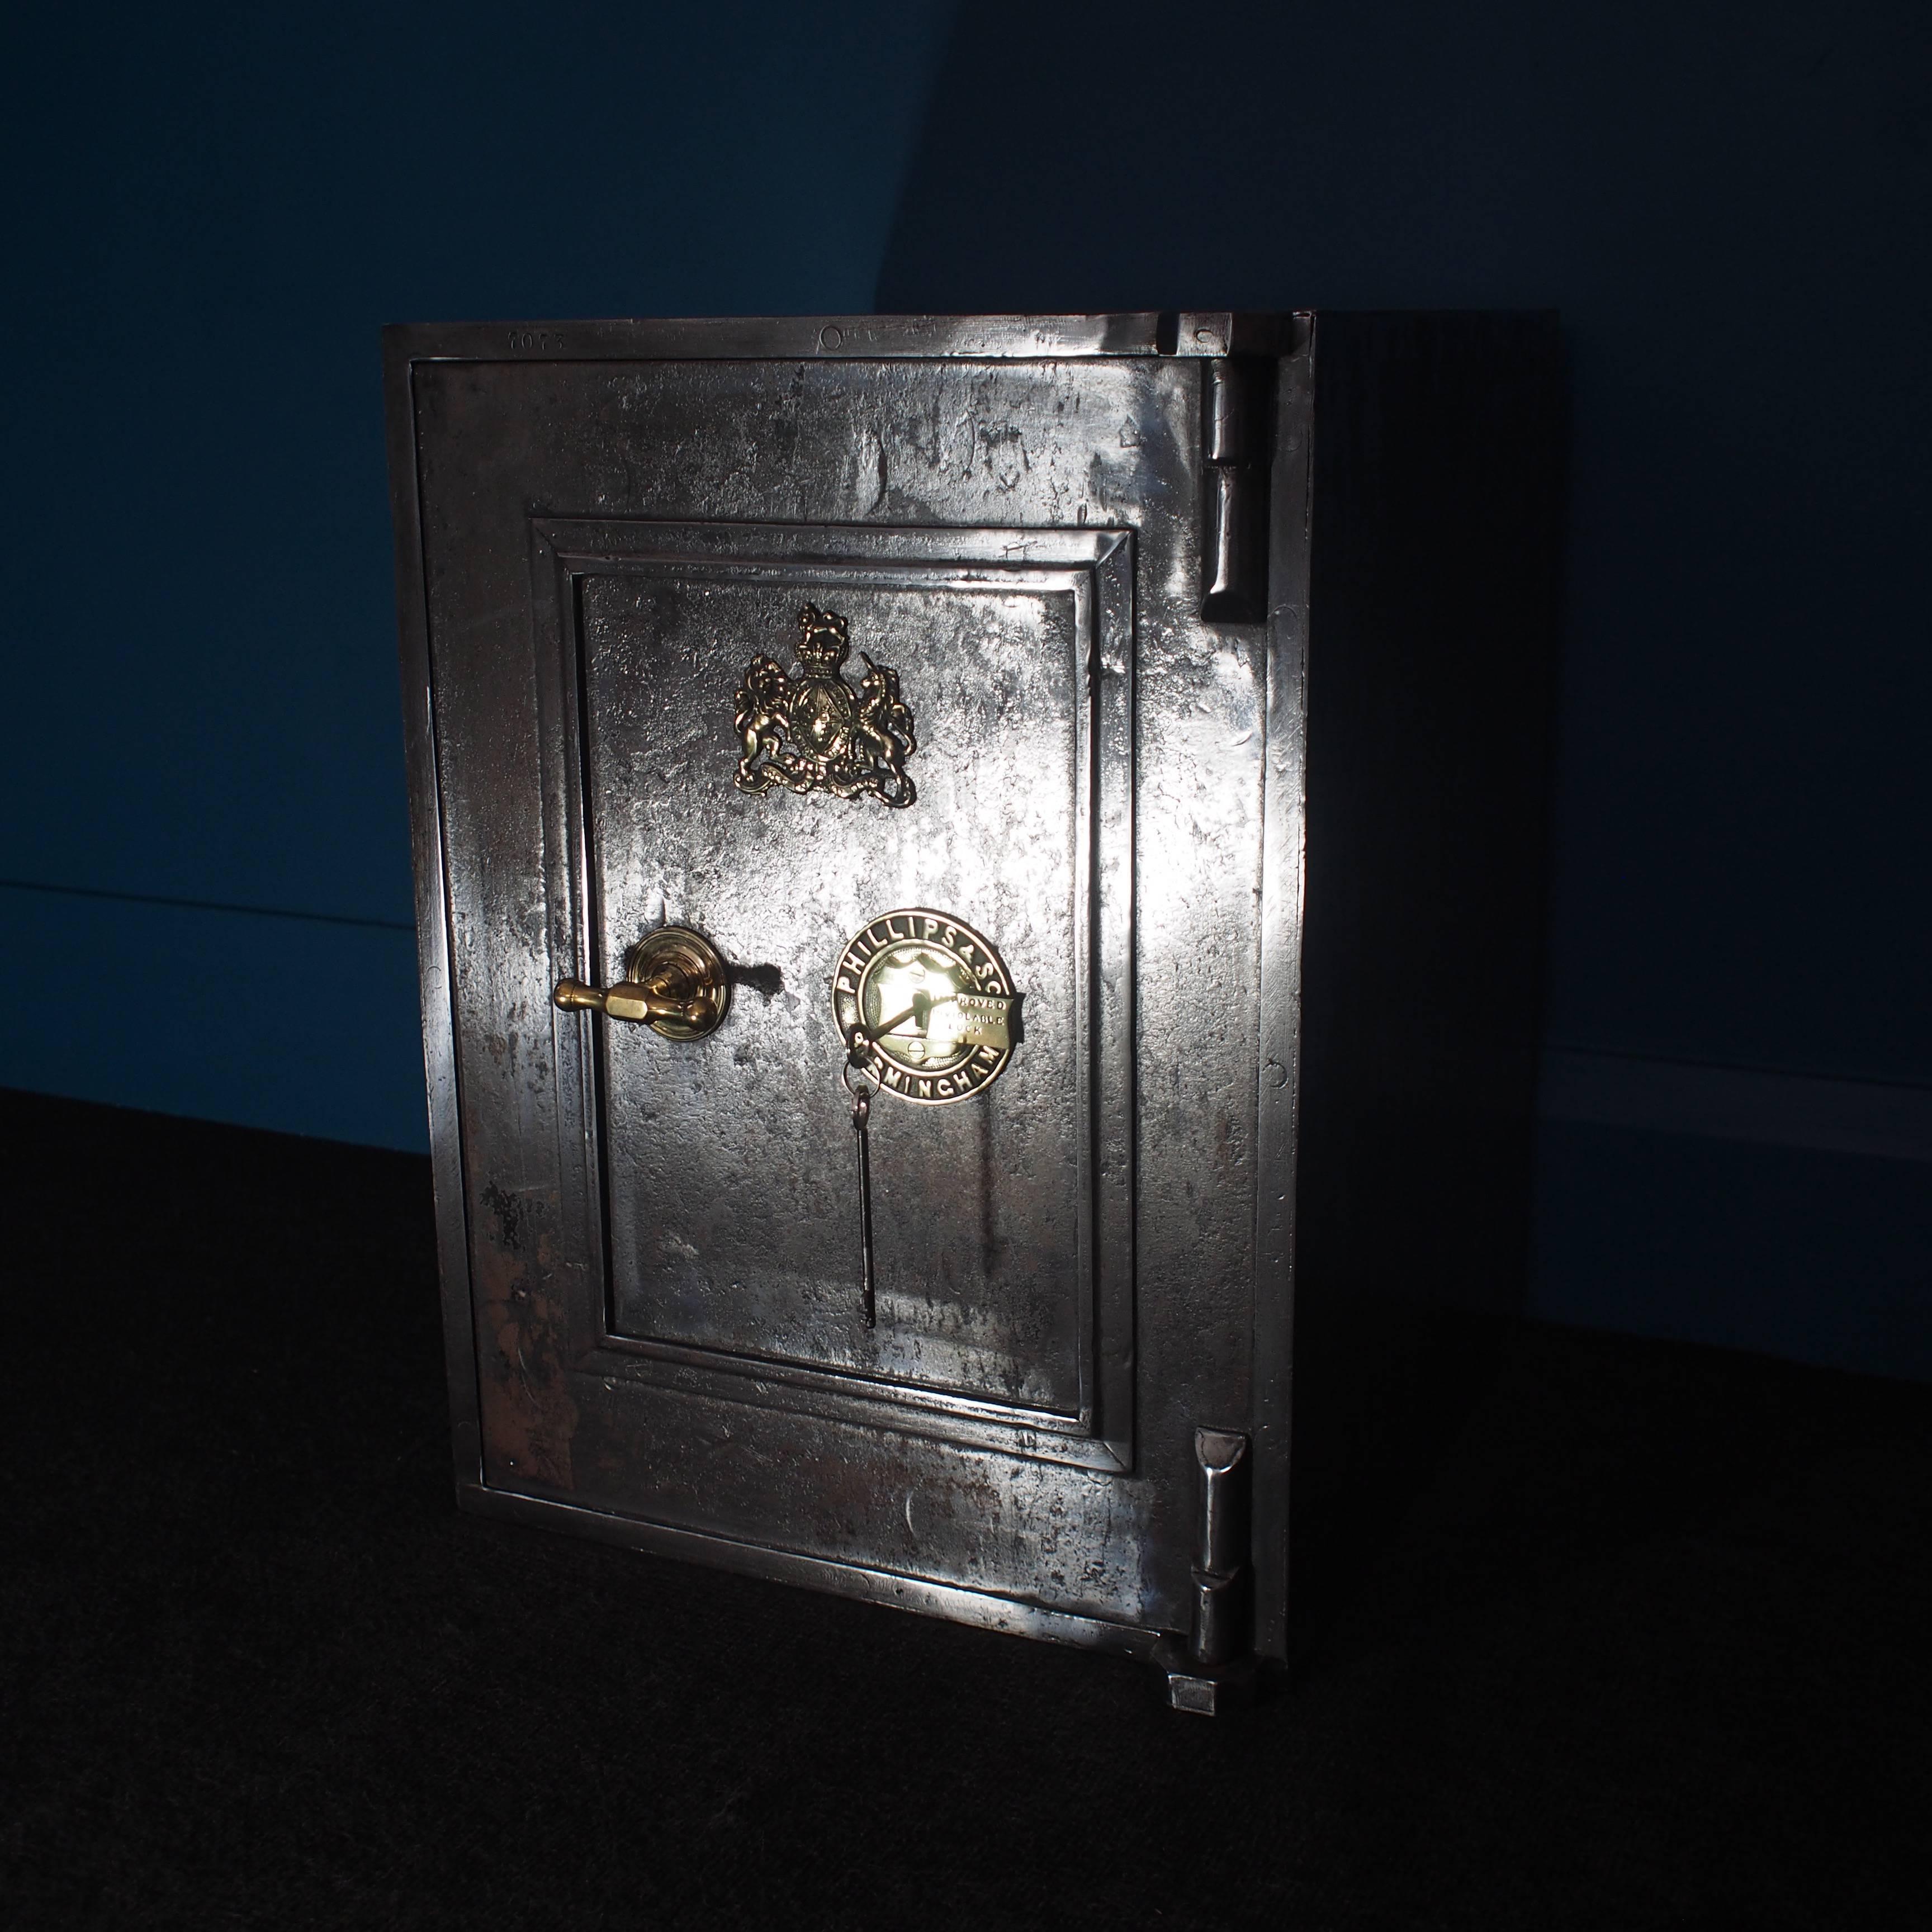 Antique safe by Phillips & Son, Birmingham, UK with polished brass Royal coat of arms plaque, lock and handle. Complete with two keys for its outer inviolable lock. The inner drawer has no key but it is unlocked.
The inner remains in its original